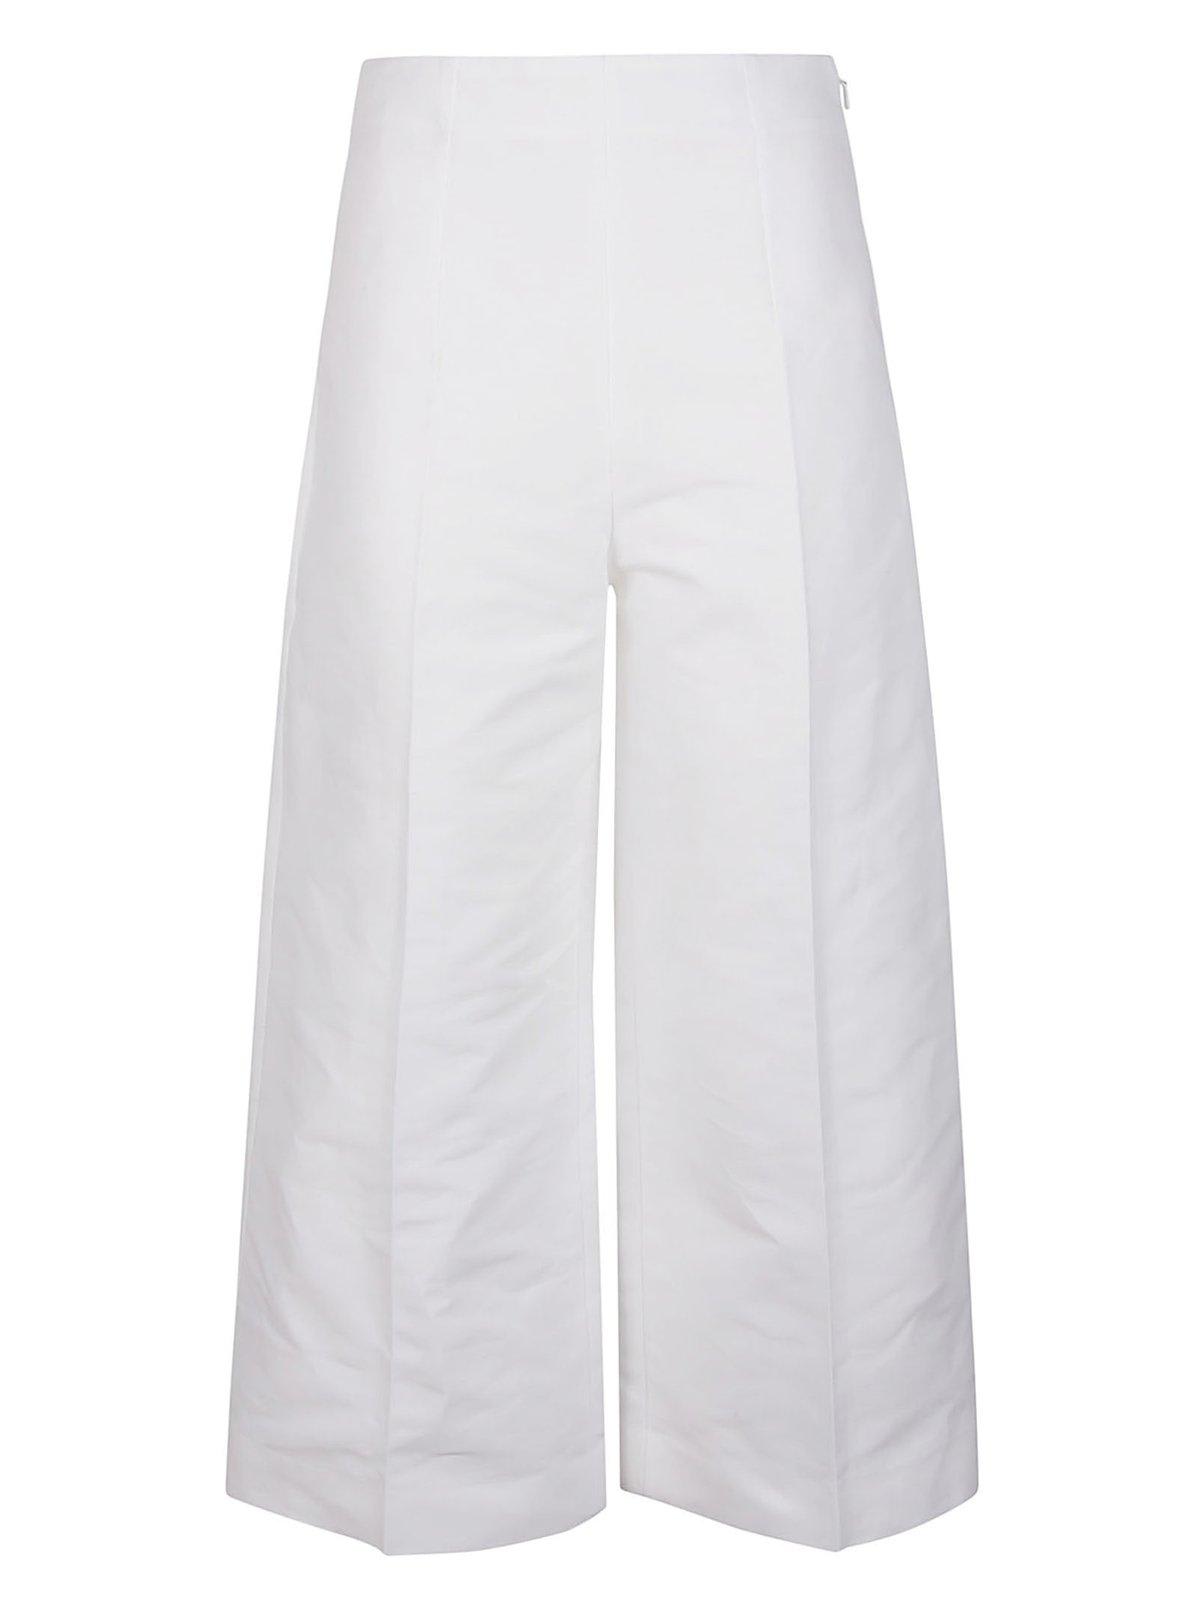 MARNI PRESSED CREASE CROPPED TROUSERS